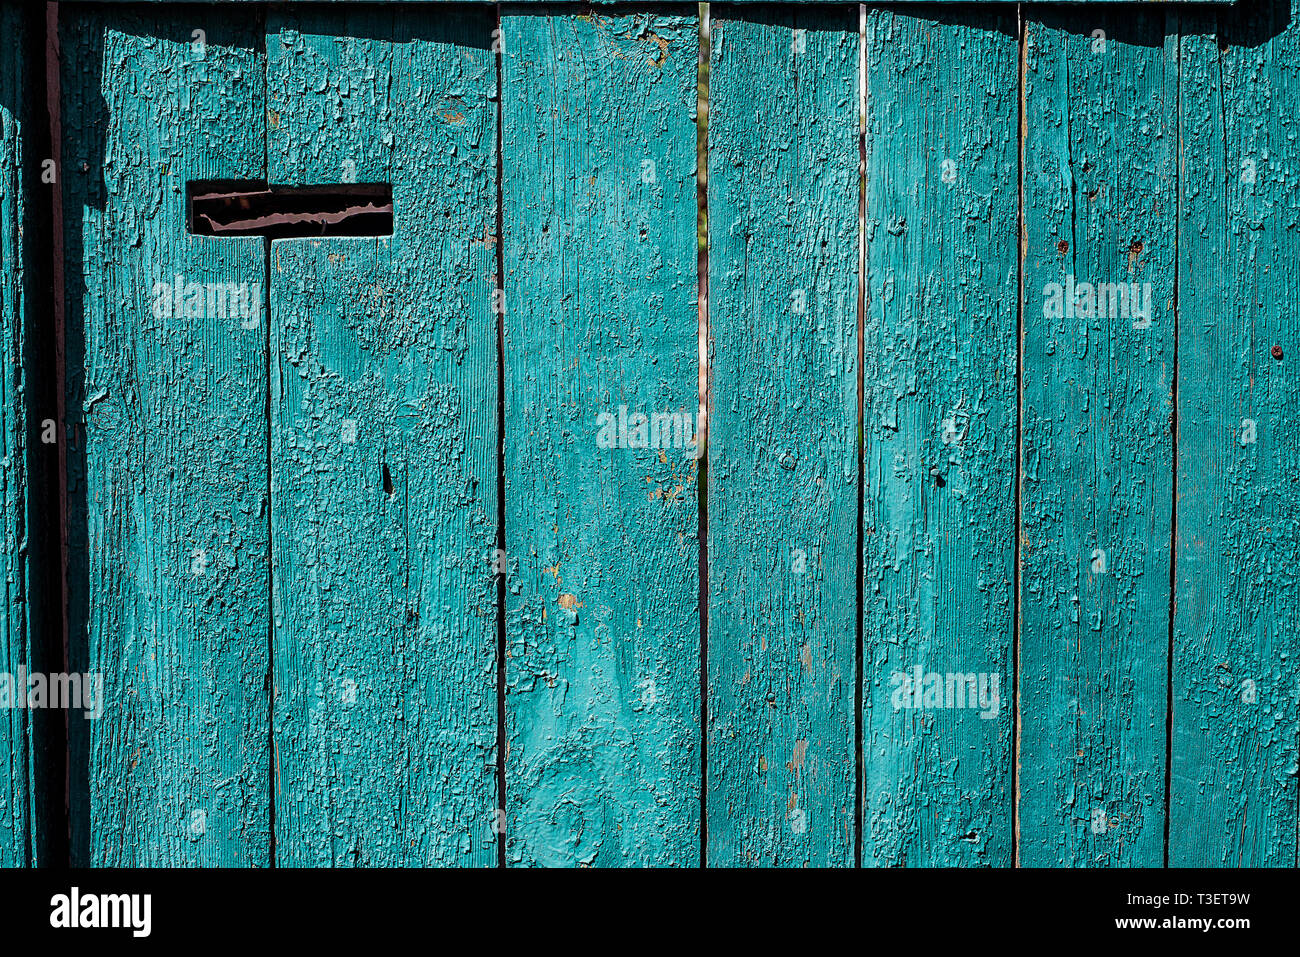 Old blue painted wooden door with mail hole. Horizontal texture of cracked paint on rusty wood Stock Photo